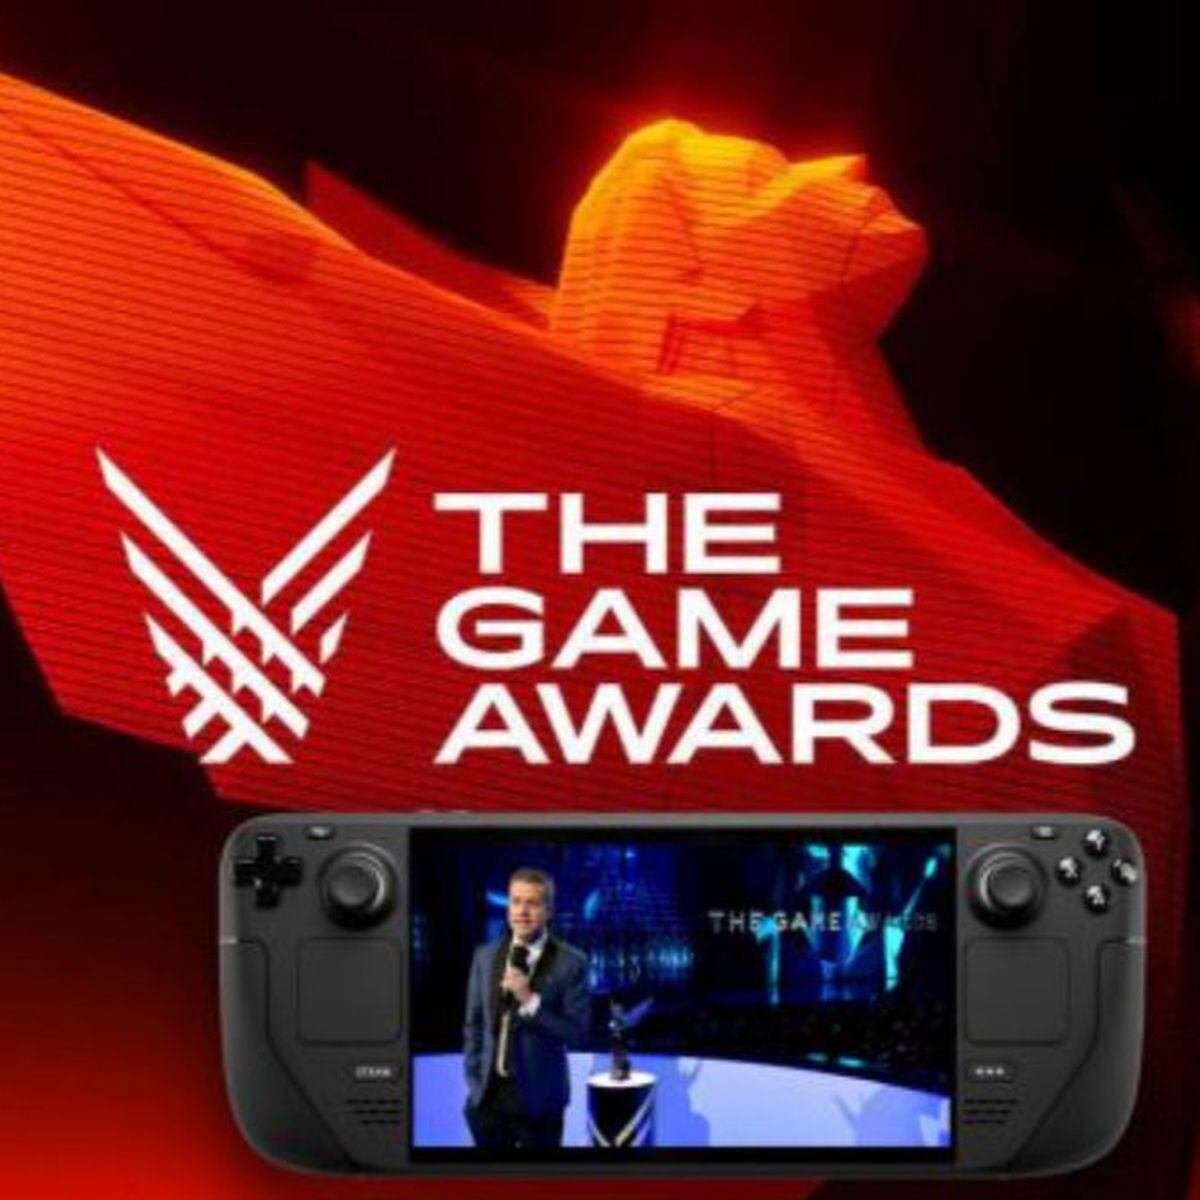 Valve will give away 150 Steam Decks to The Game Awards 2022 viewers